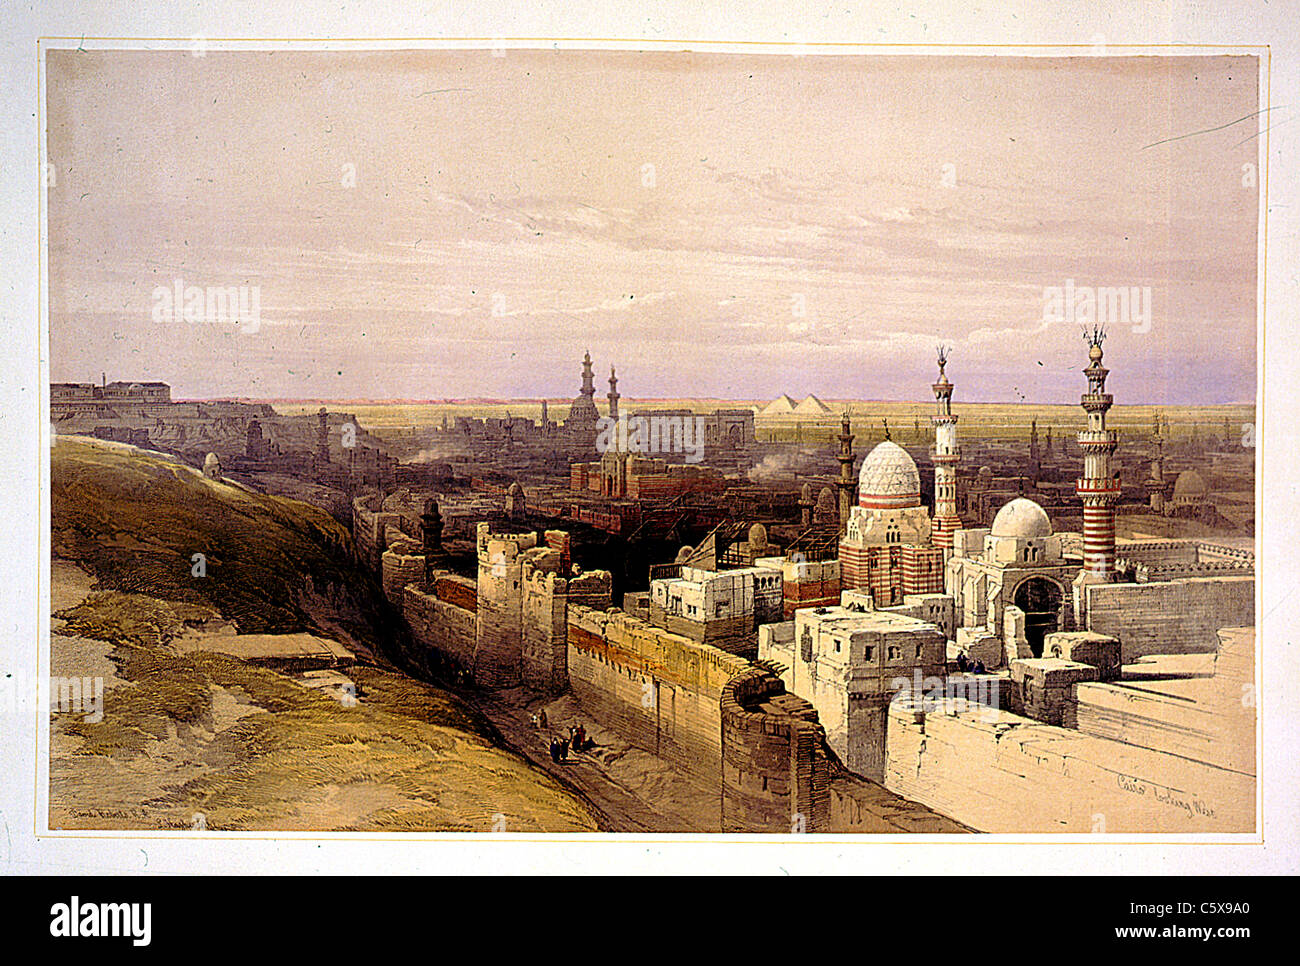 Cairo looking west, Louis Haghe / David Roberts from 'The Holy Land, Syria, Idumea, Arabia, Egypt and Nubia' Stock Photo